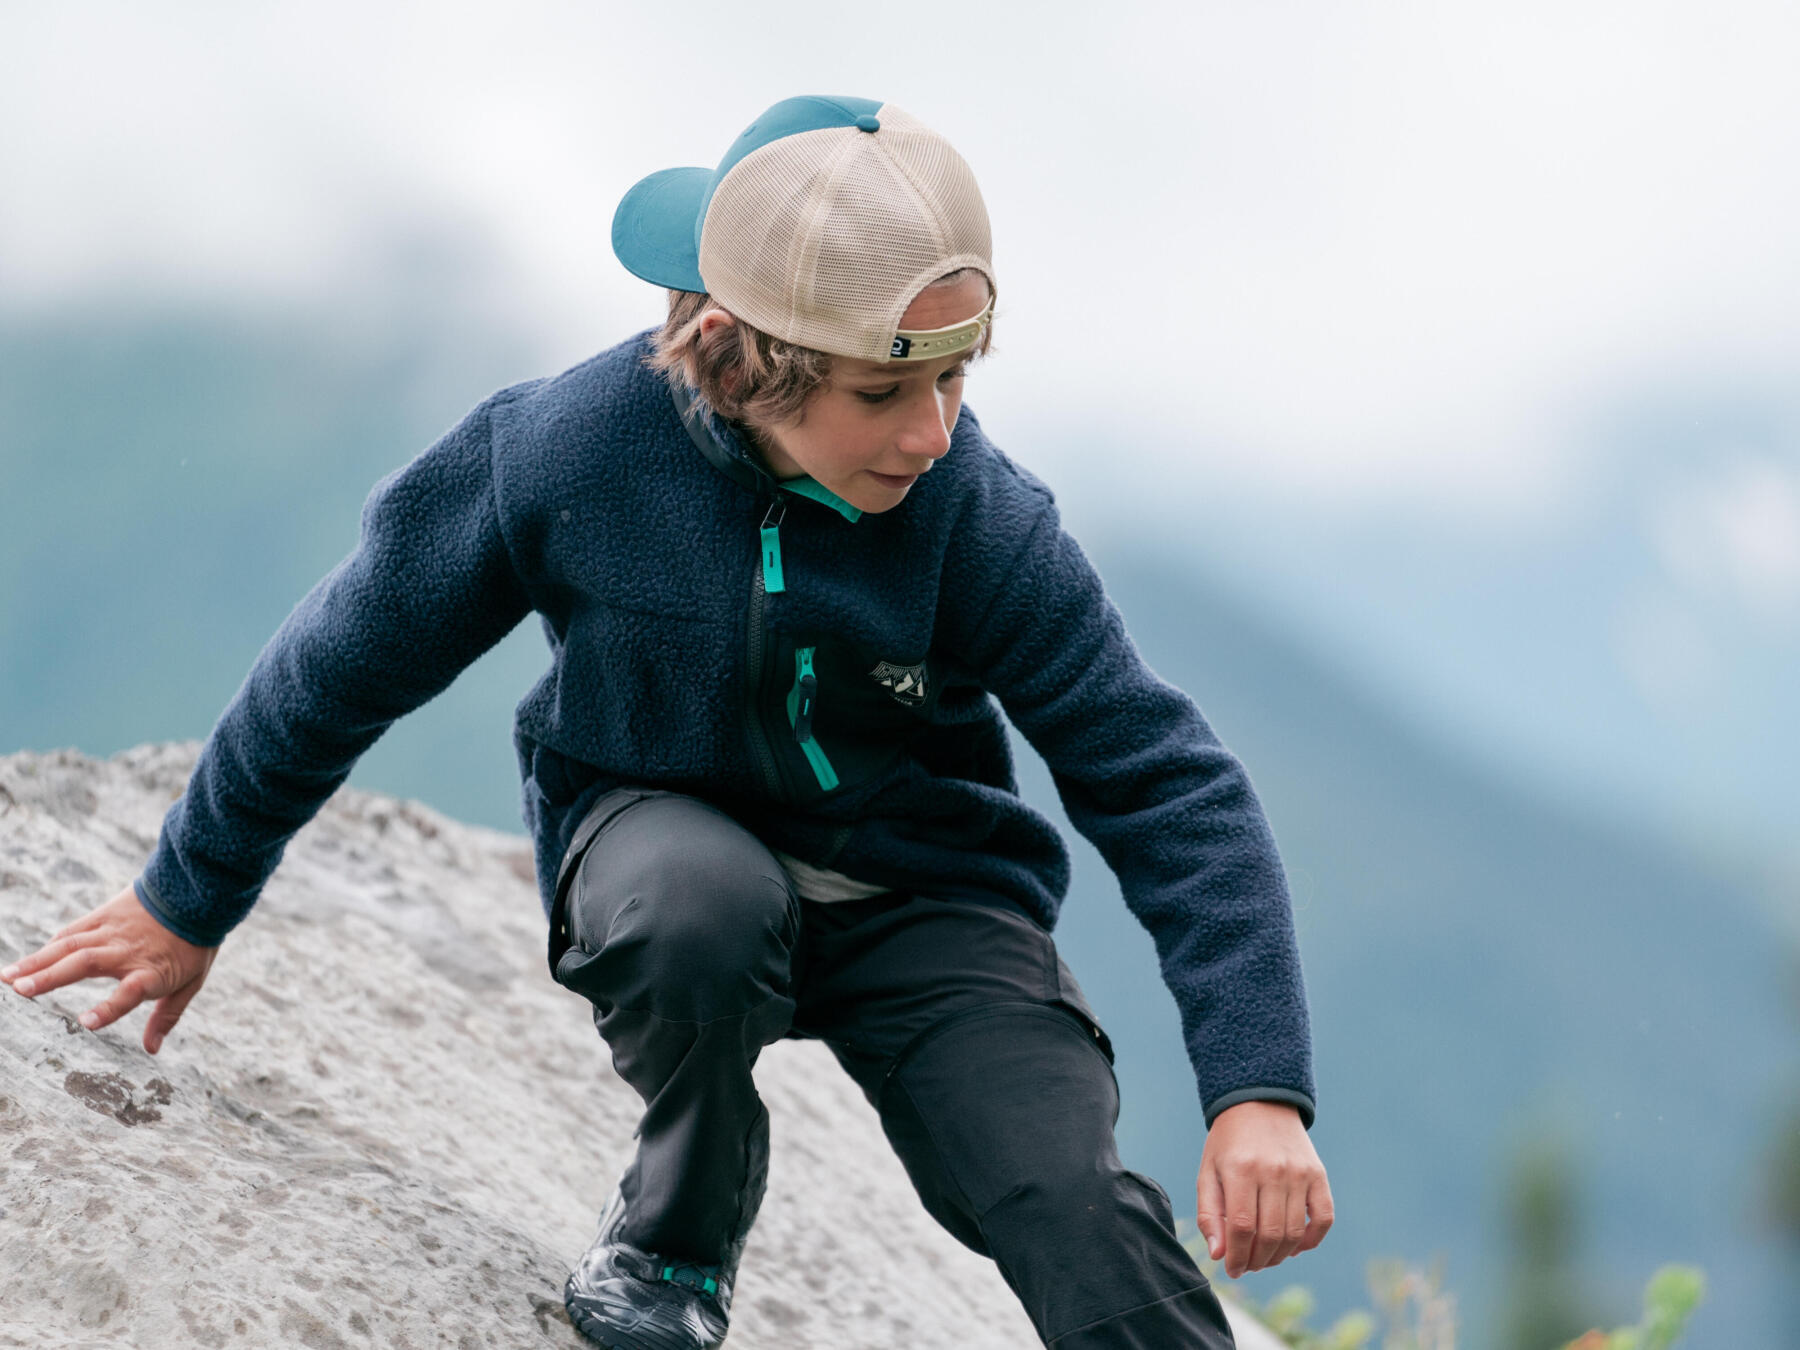 5 tips to motivate your pre-teen when hiking